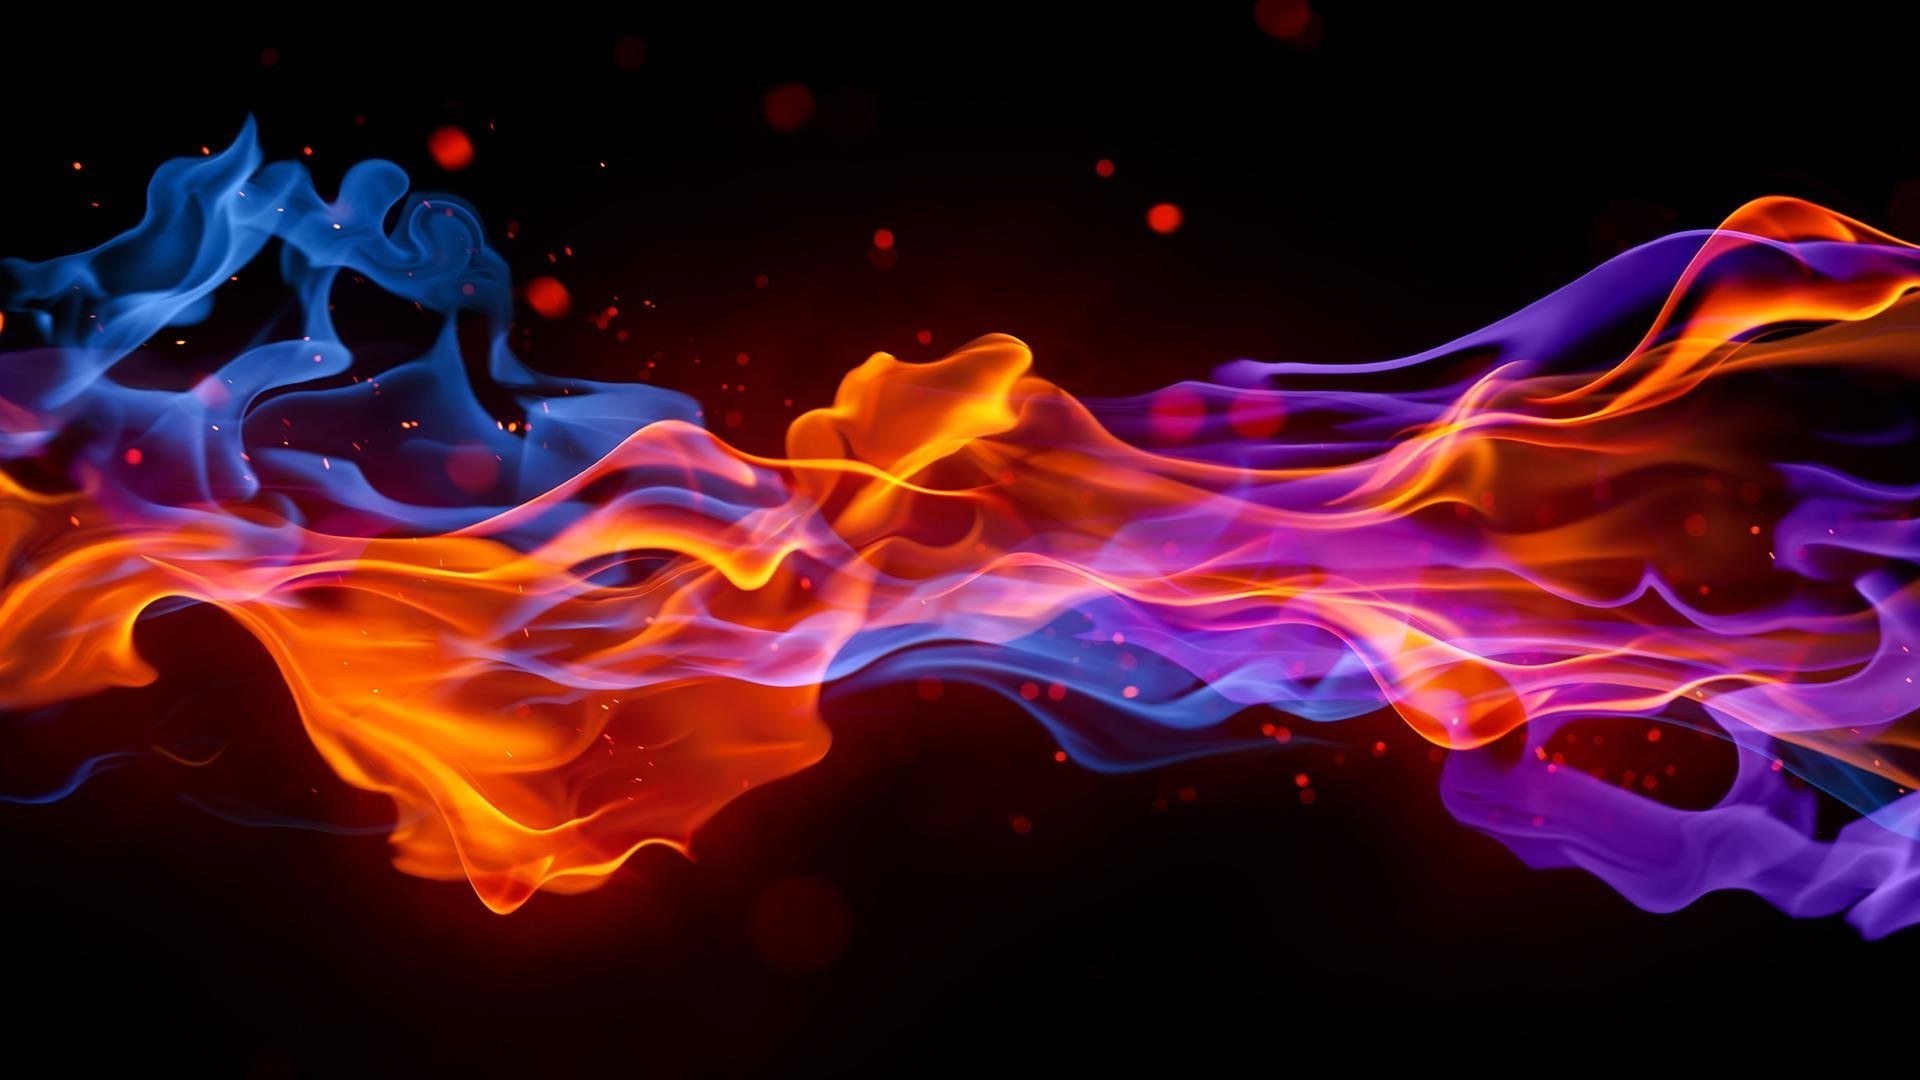 abstract and graphics flame abstract burnt burn smoke design energy motion heat background hot wallpaper magic dynamic flammable flow wave pattern danger bonfire